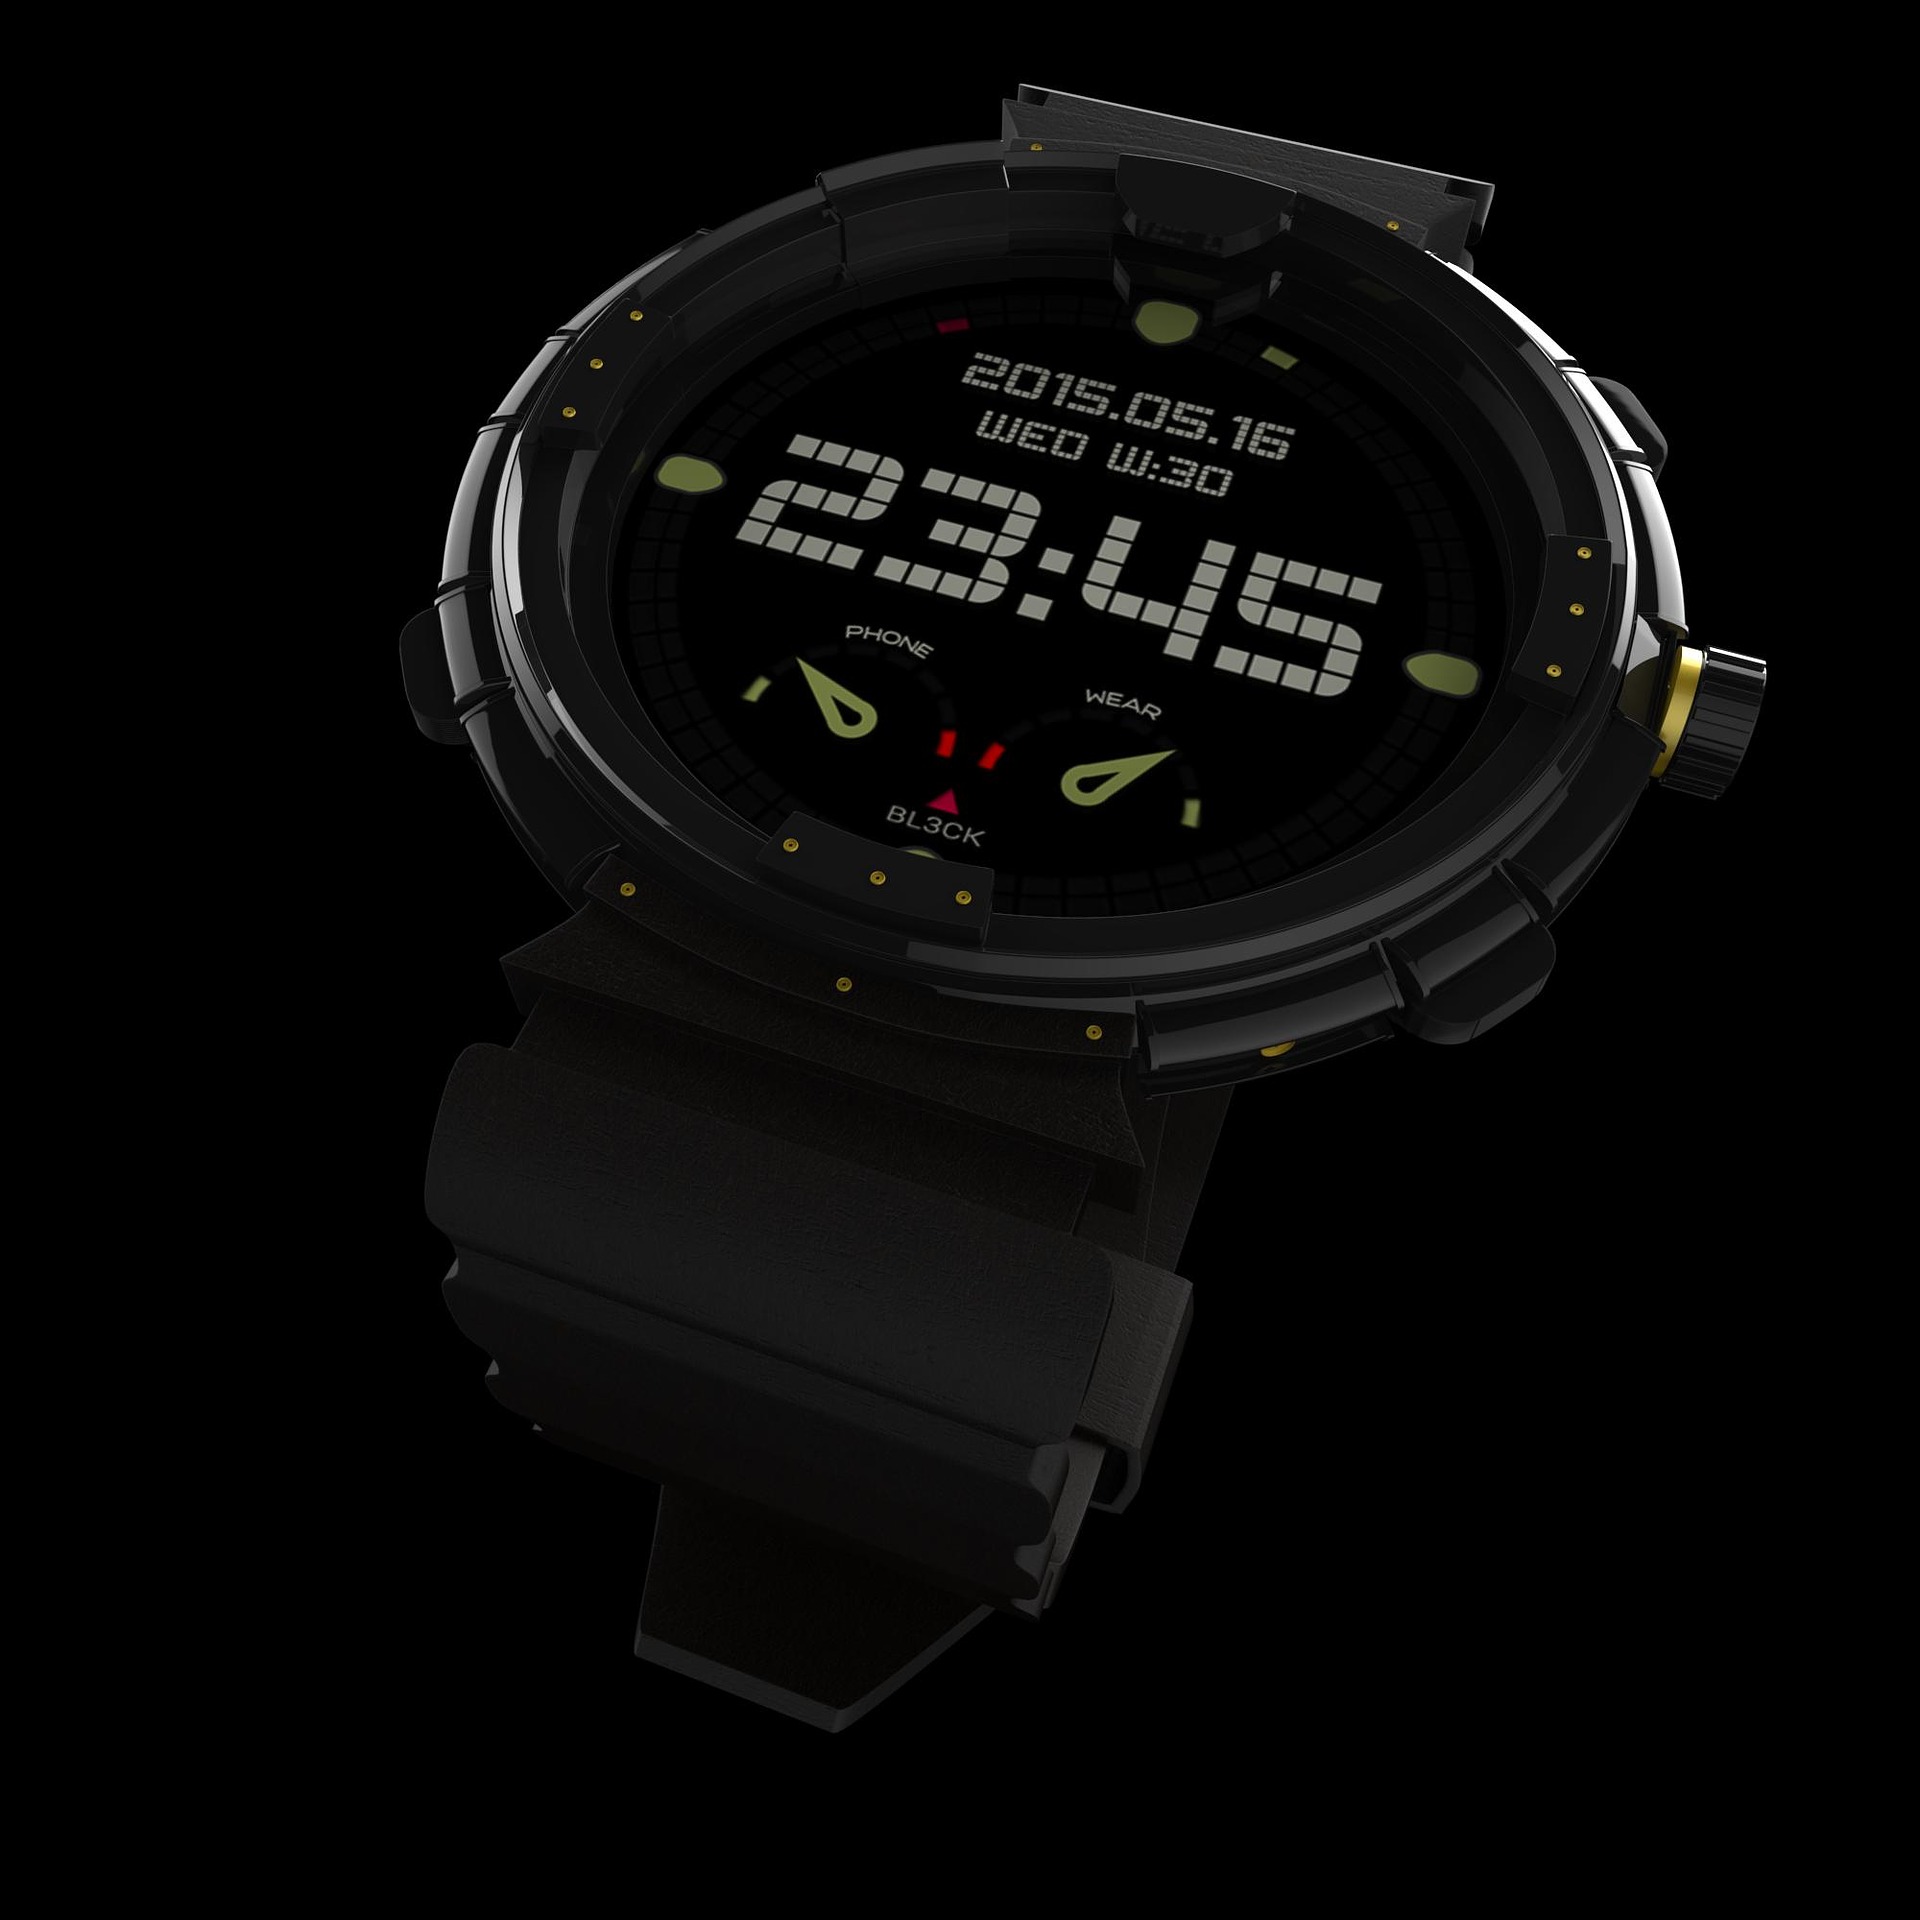 Garmin Instinct 2 Smartwatch Series Launched in India: Price, Features